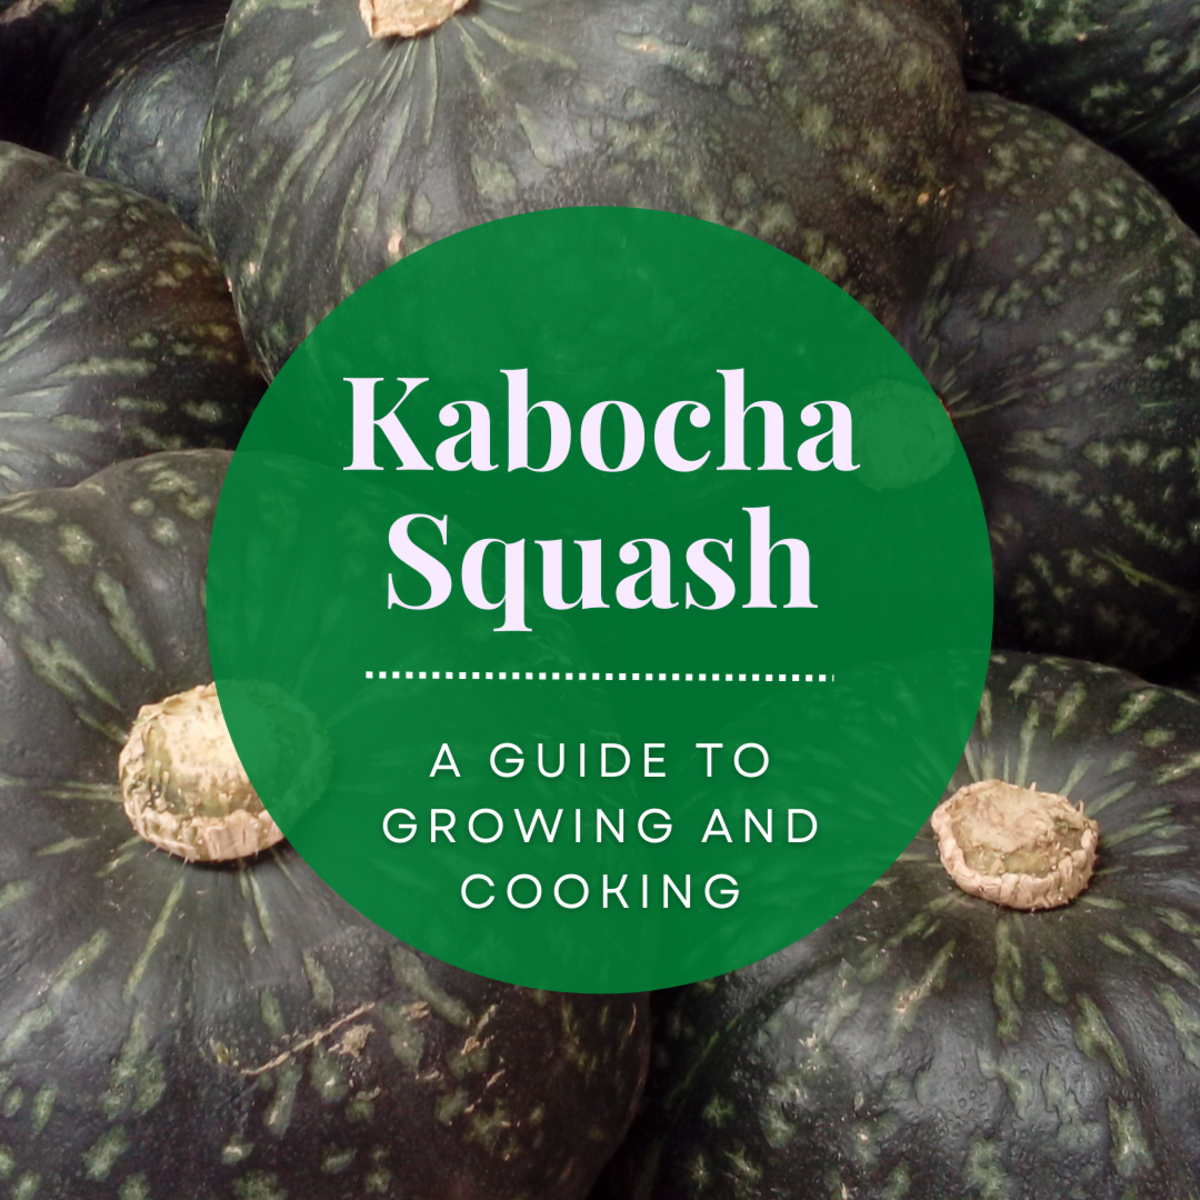 This guide will break down how to grow kabocha squash, as well as provide information on how to properly prepare its flowers, stems, and leaves for cooking.